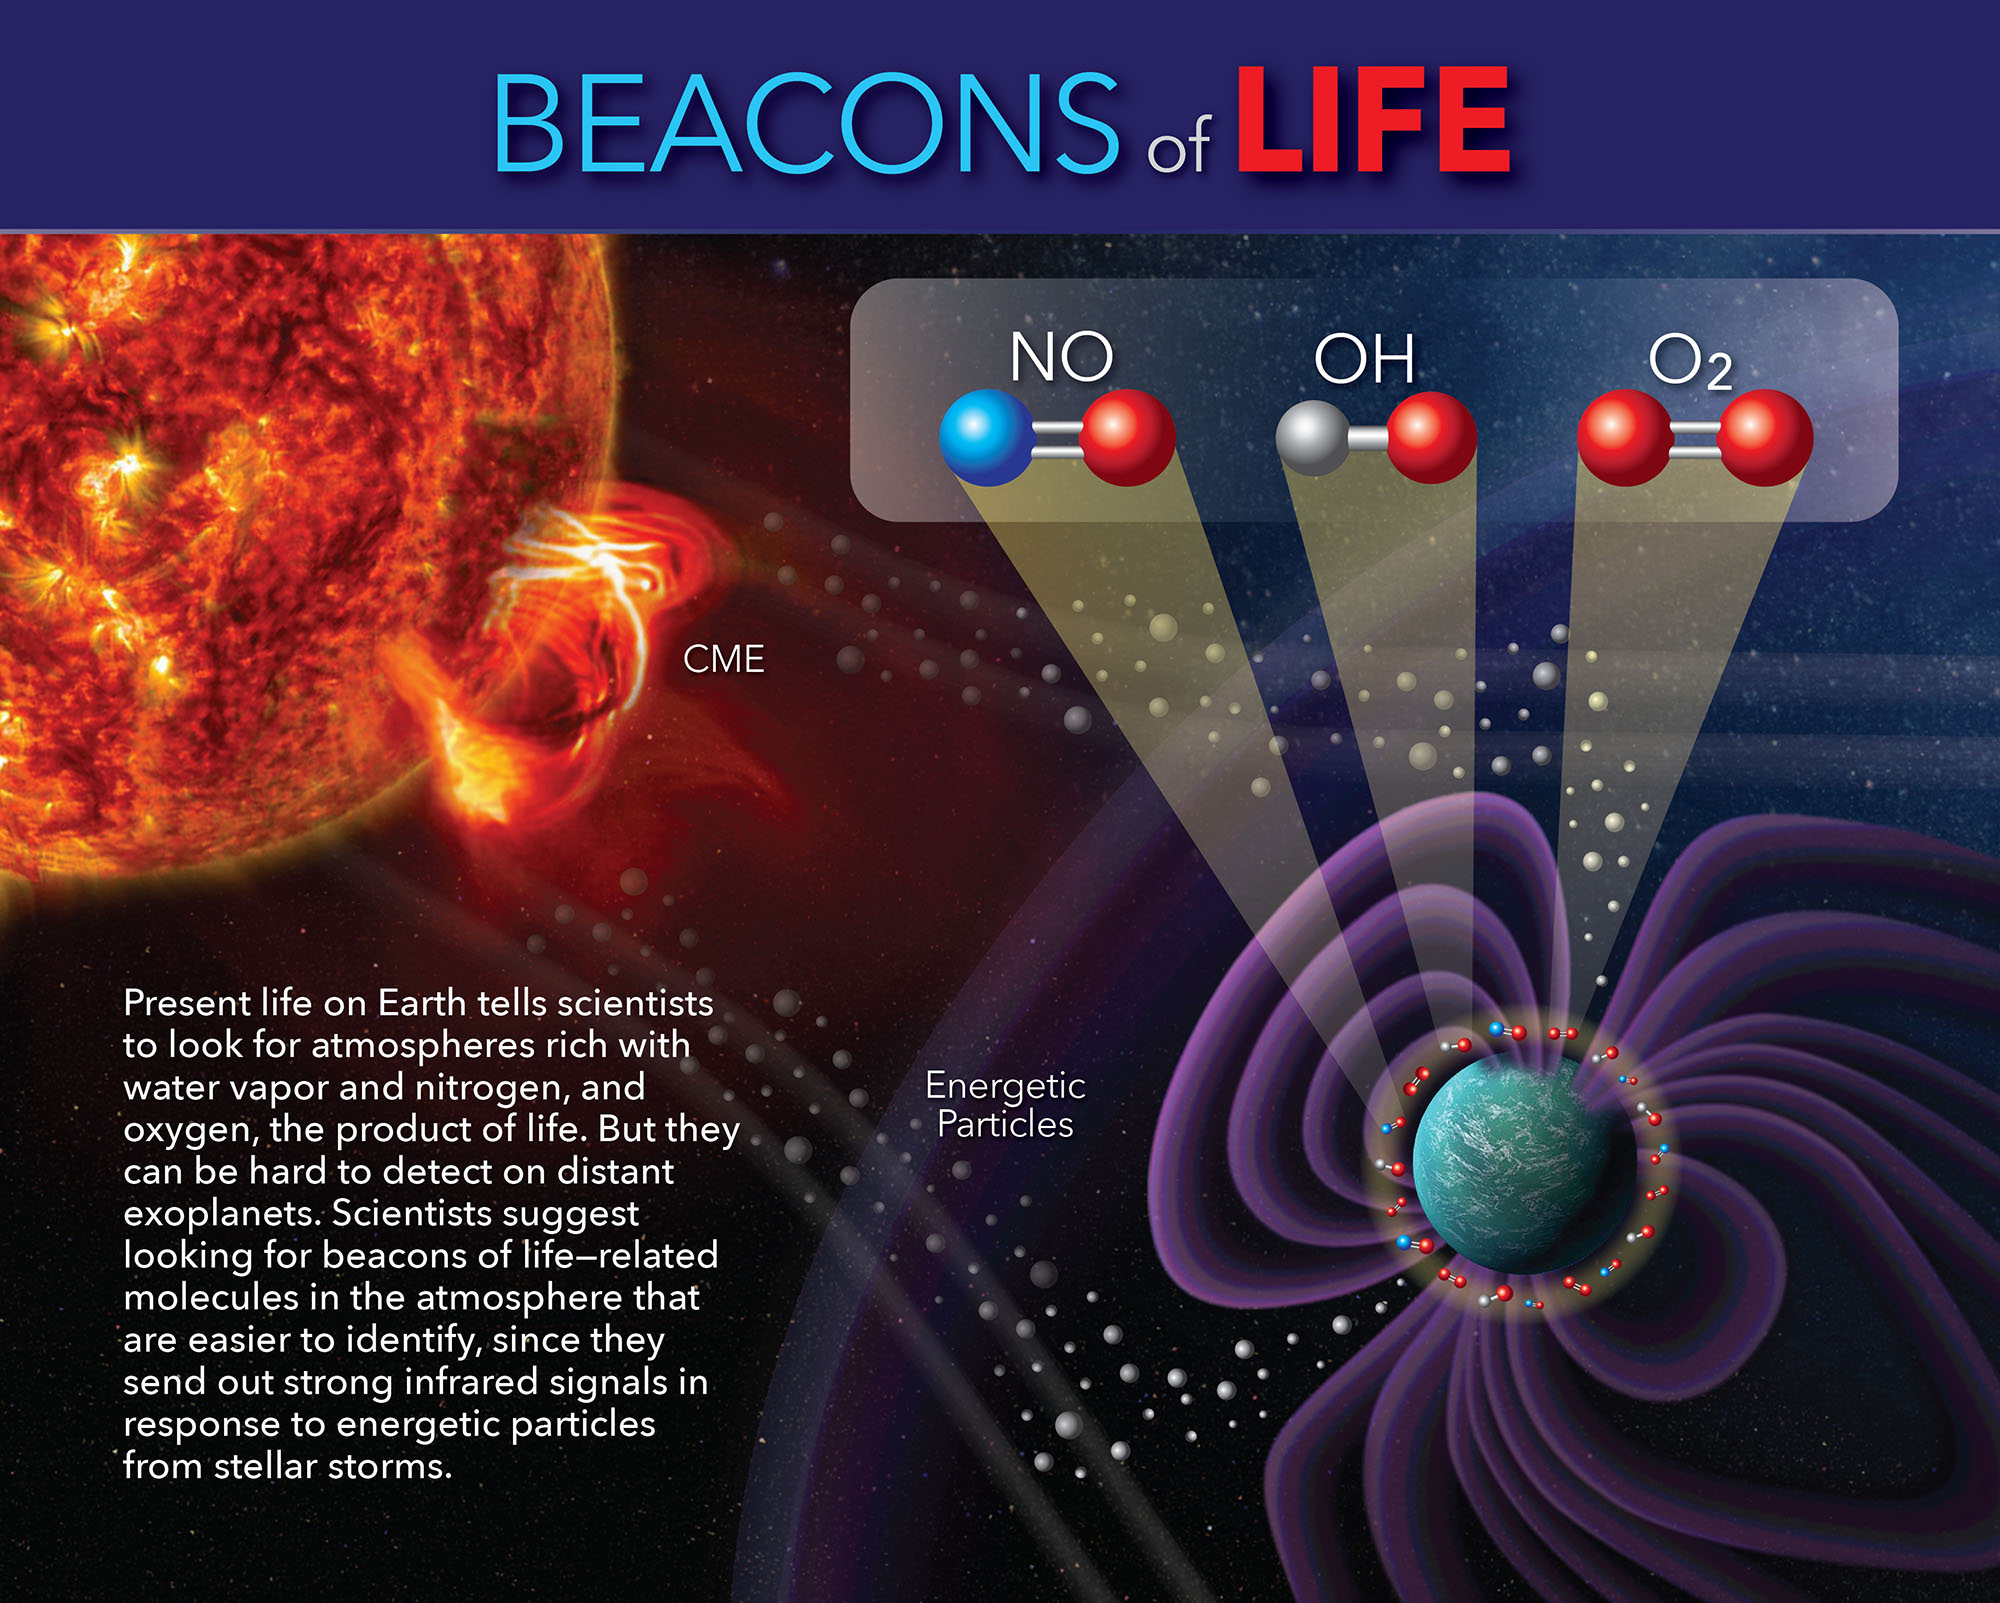 Beacons of Life infographic